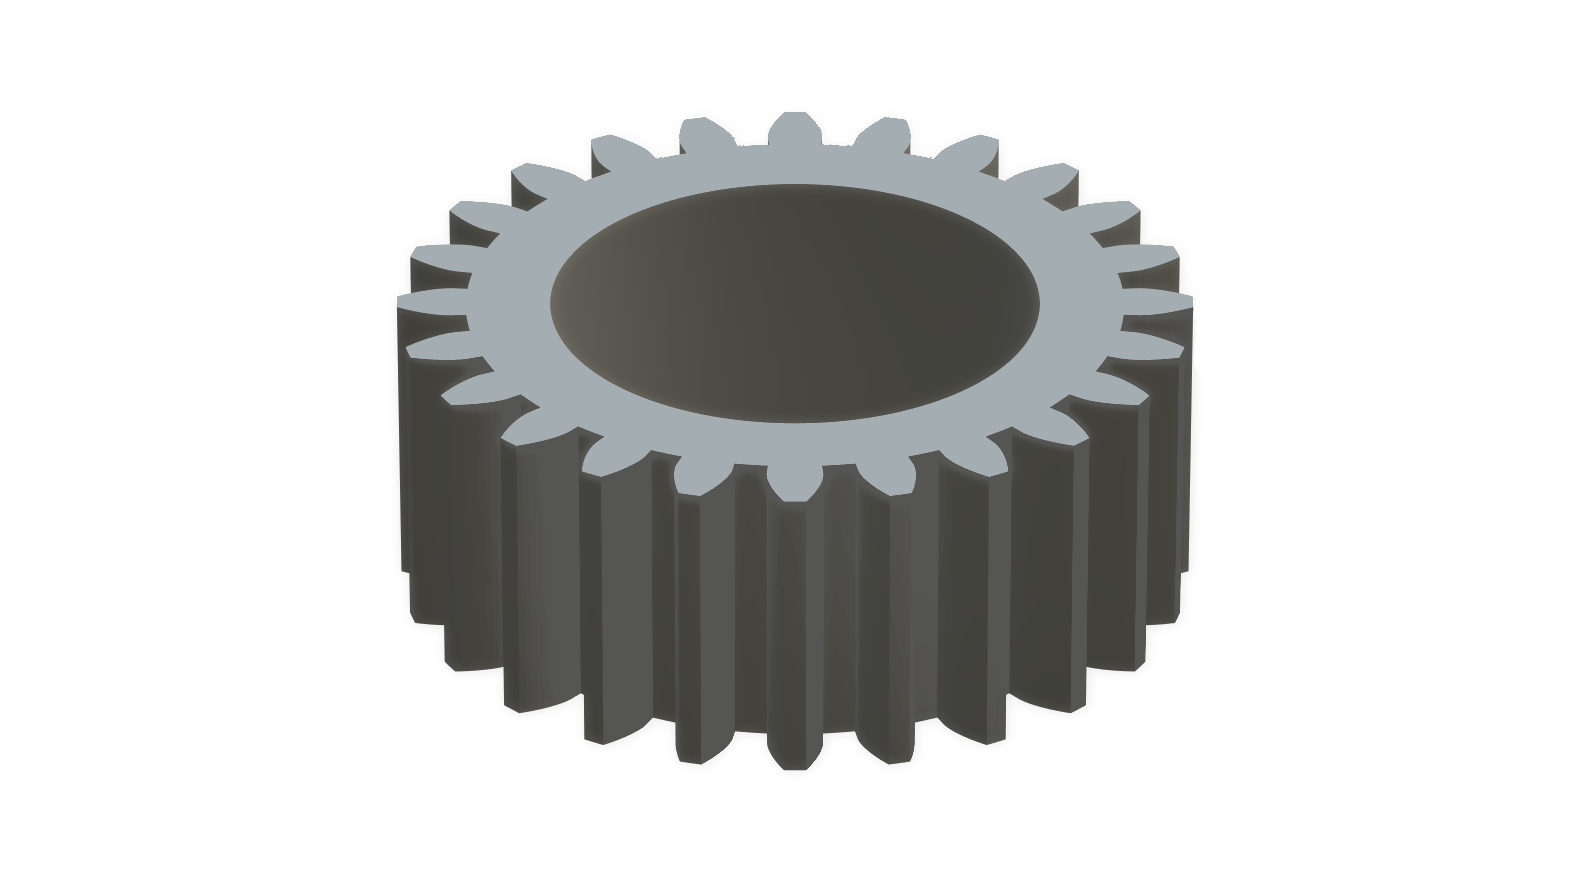 A picture of a spur gear with the stlgears.com logo as the background.